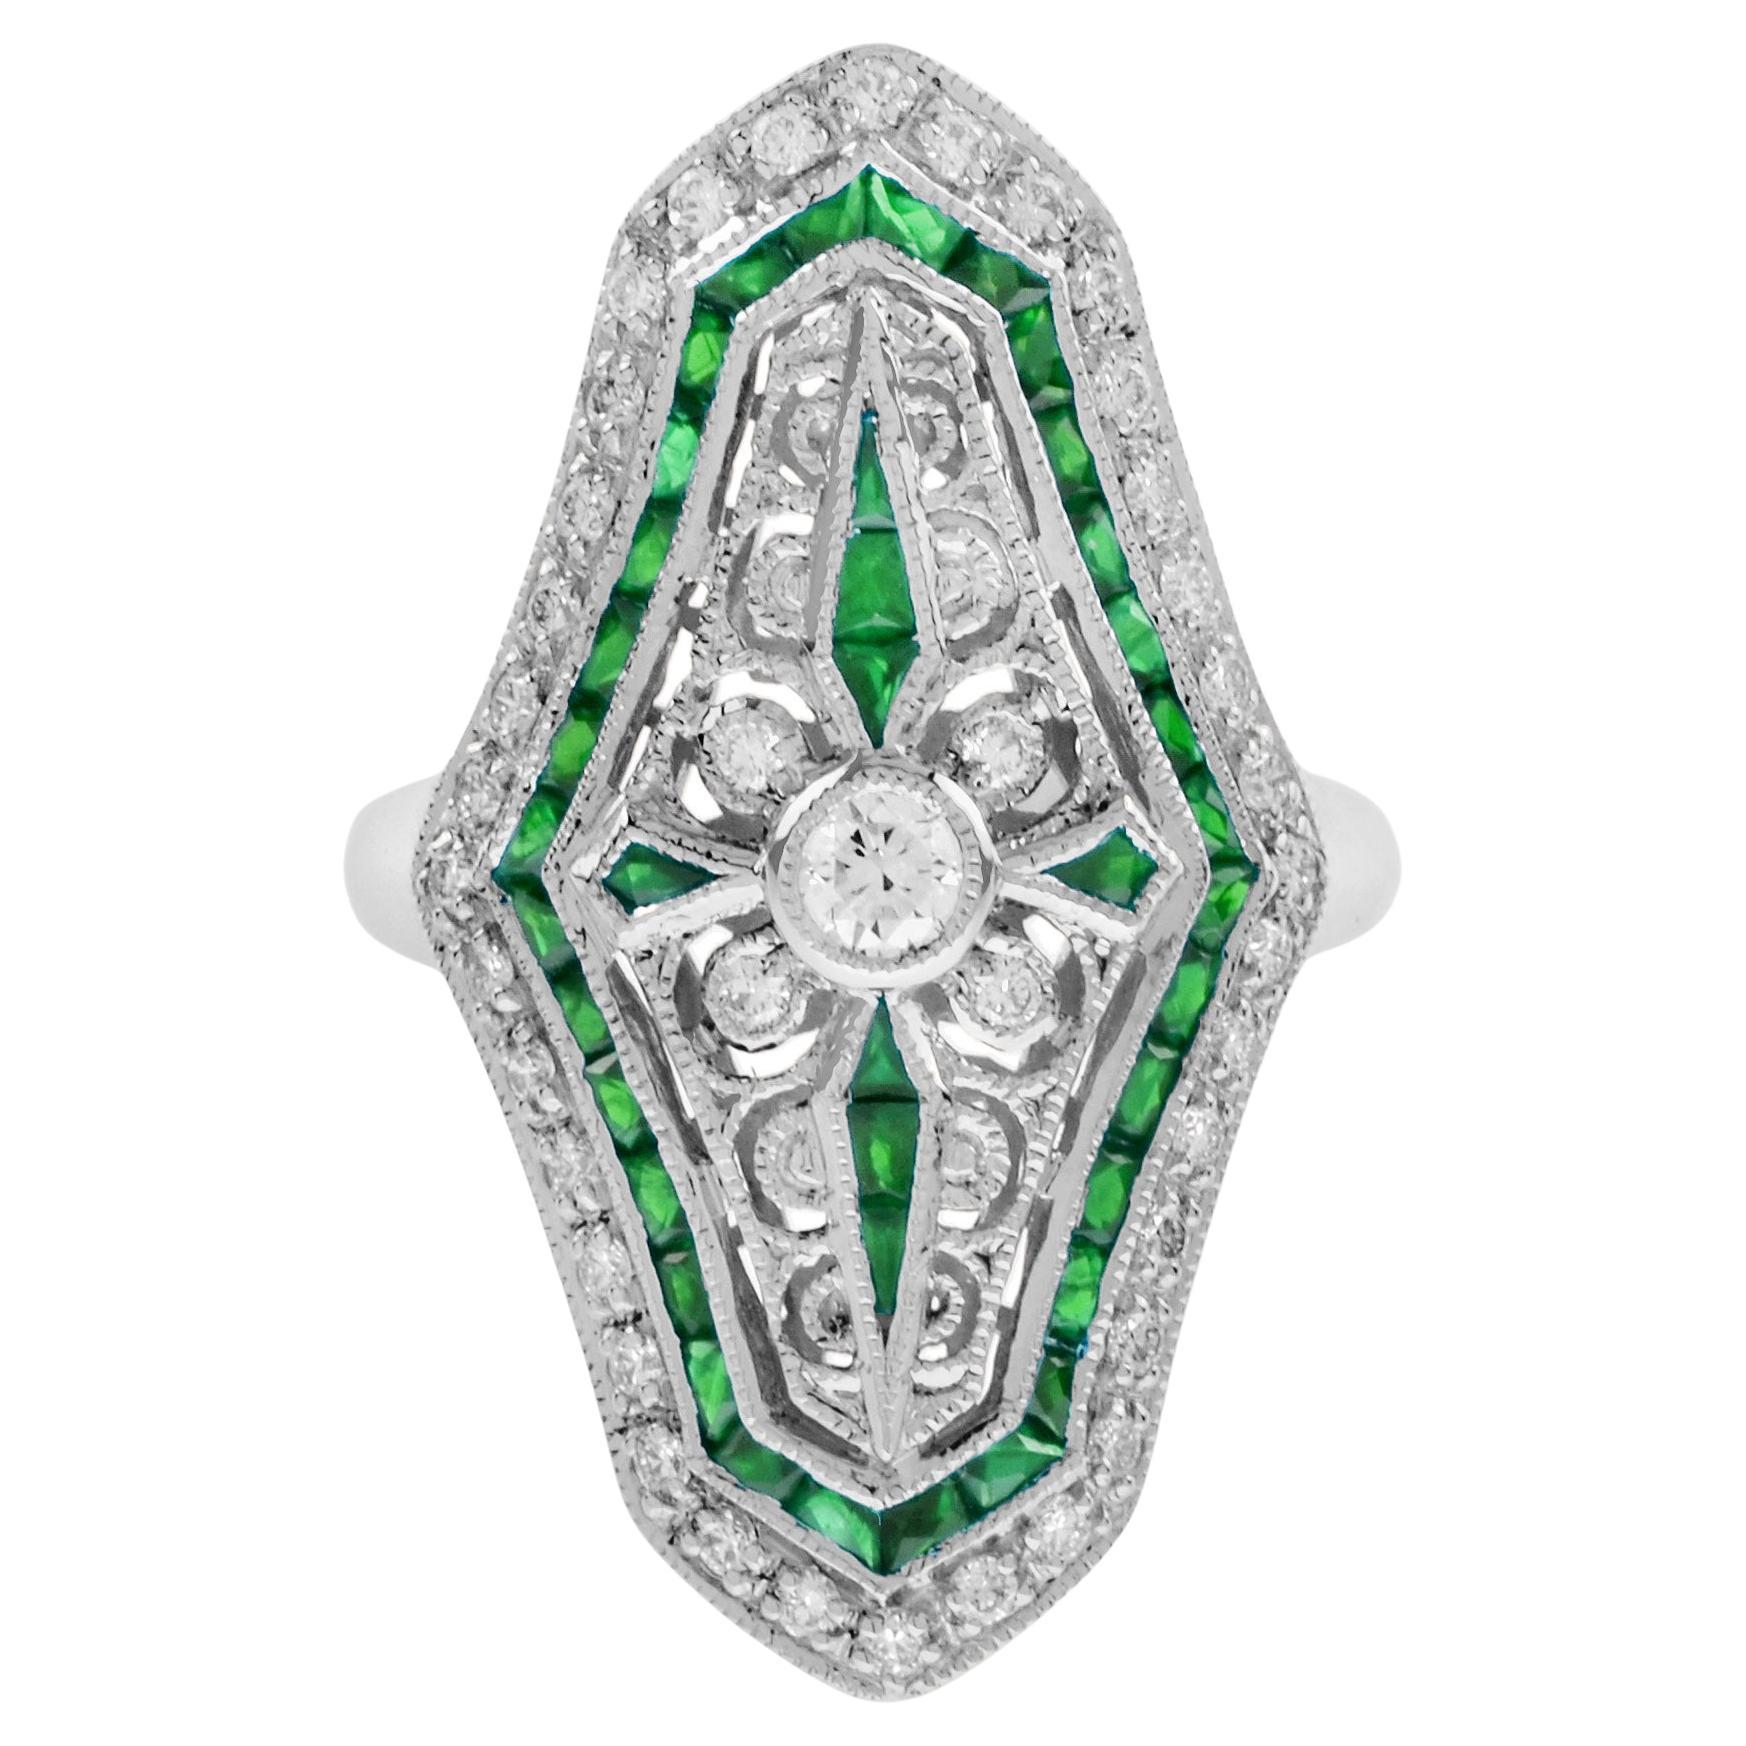 Diamond and Emerald Art Deco Style Dinner Ring in 18K White Gold